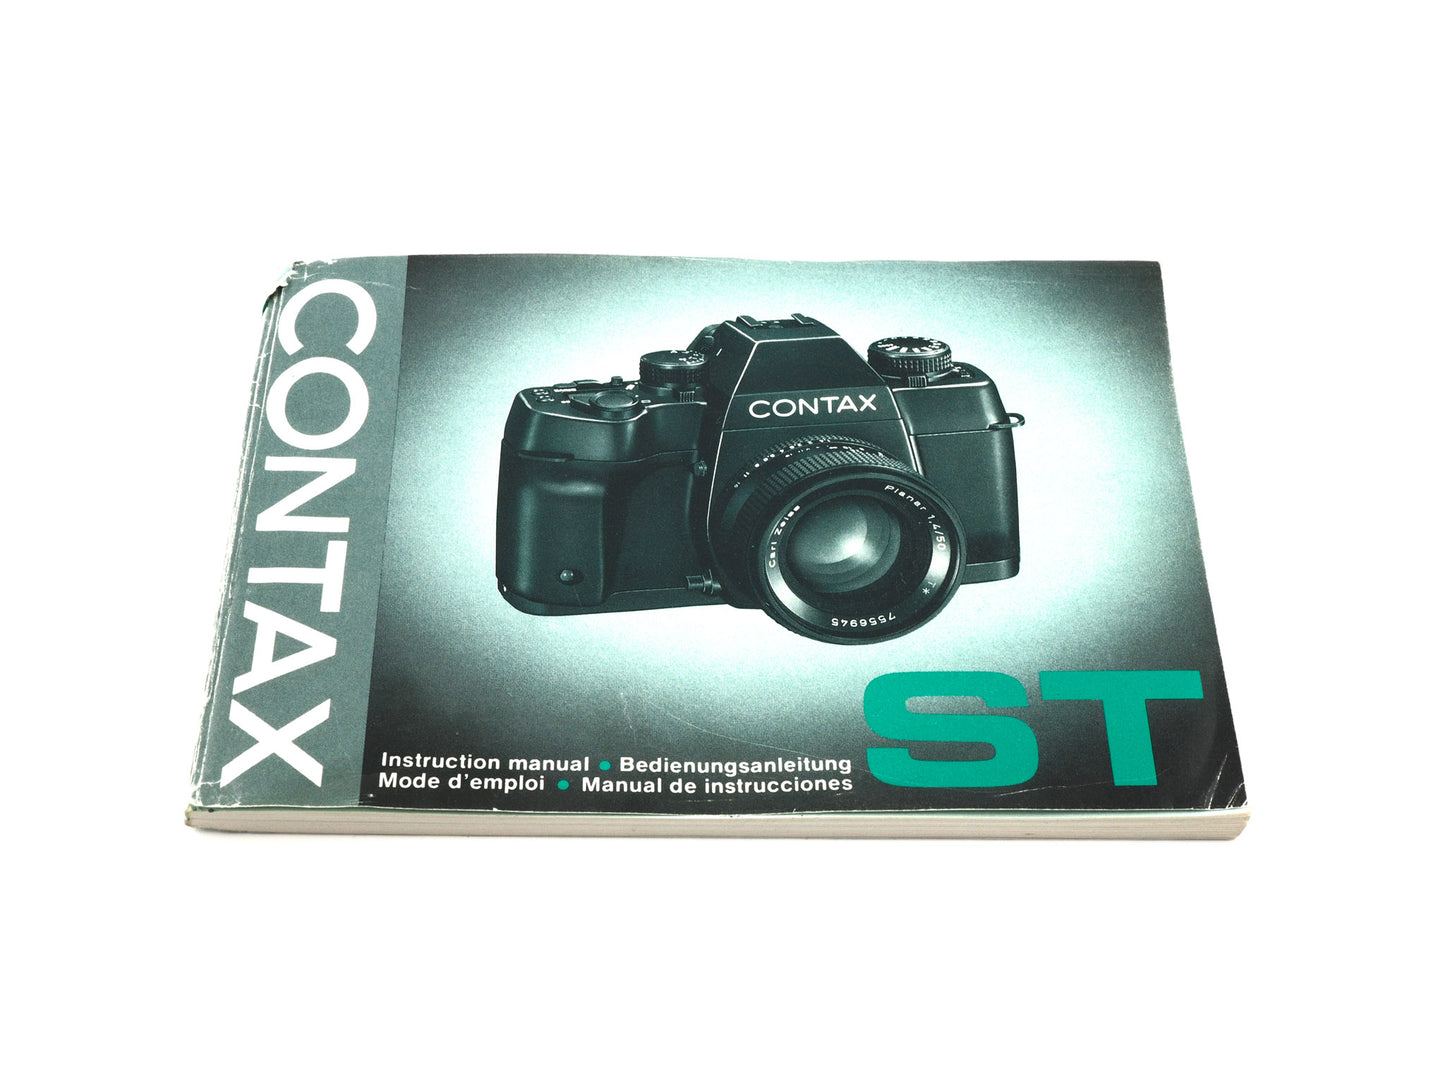 Contax ST Instruction Manual - Accessory